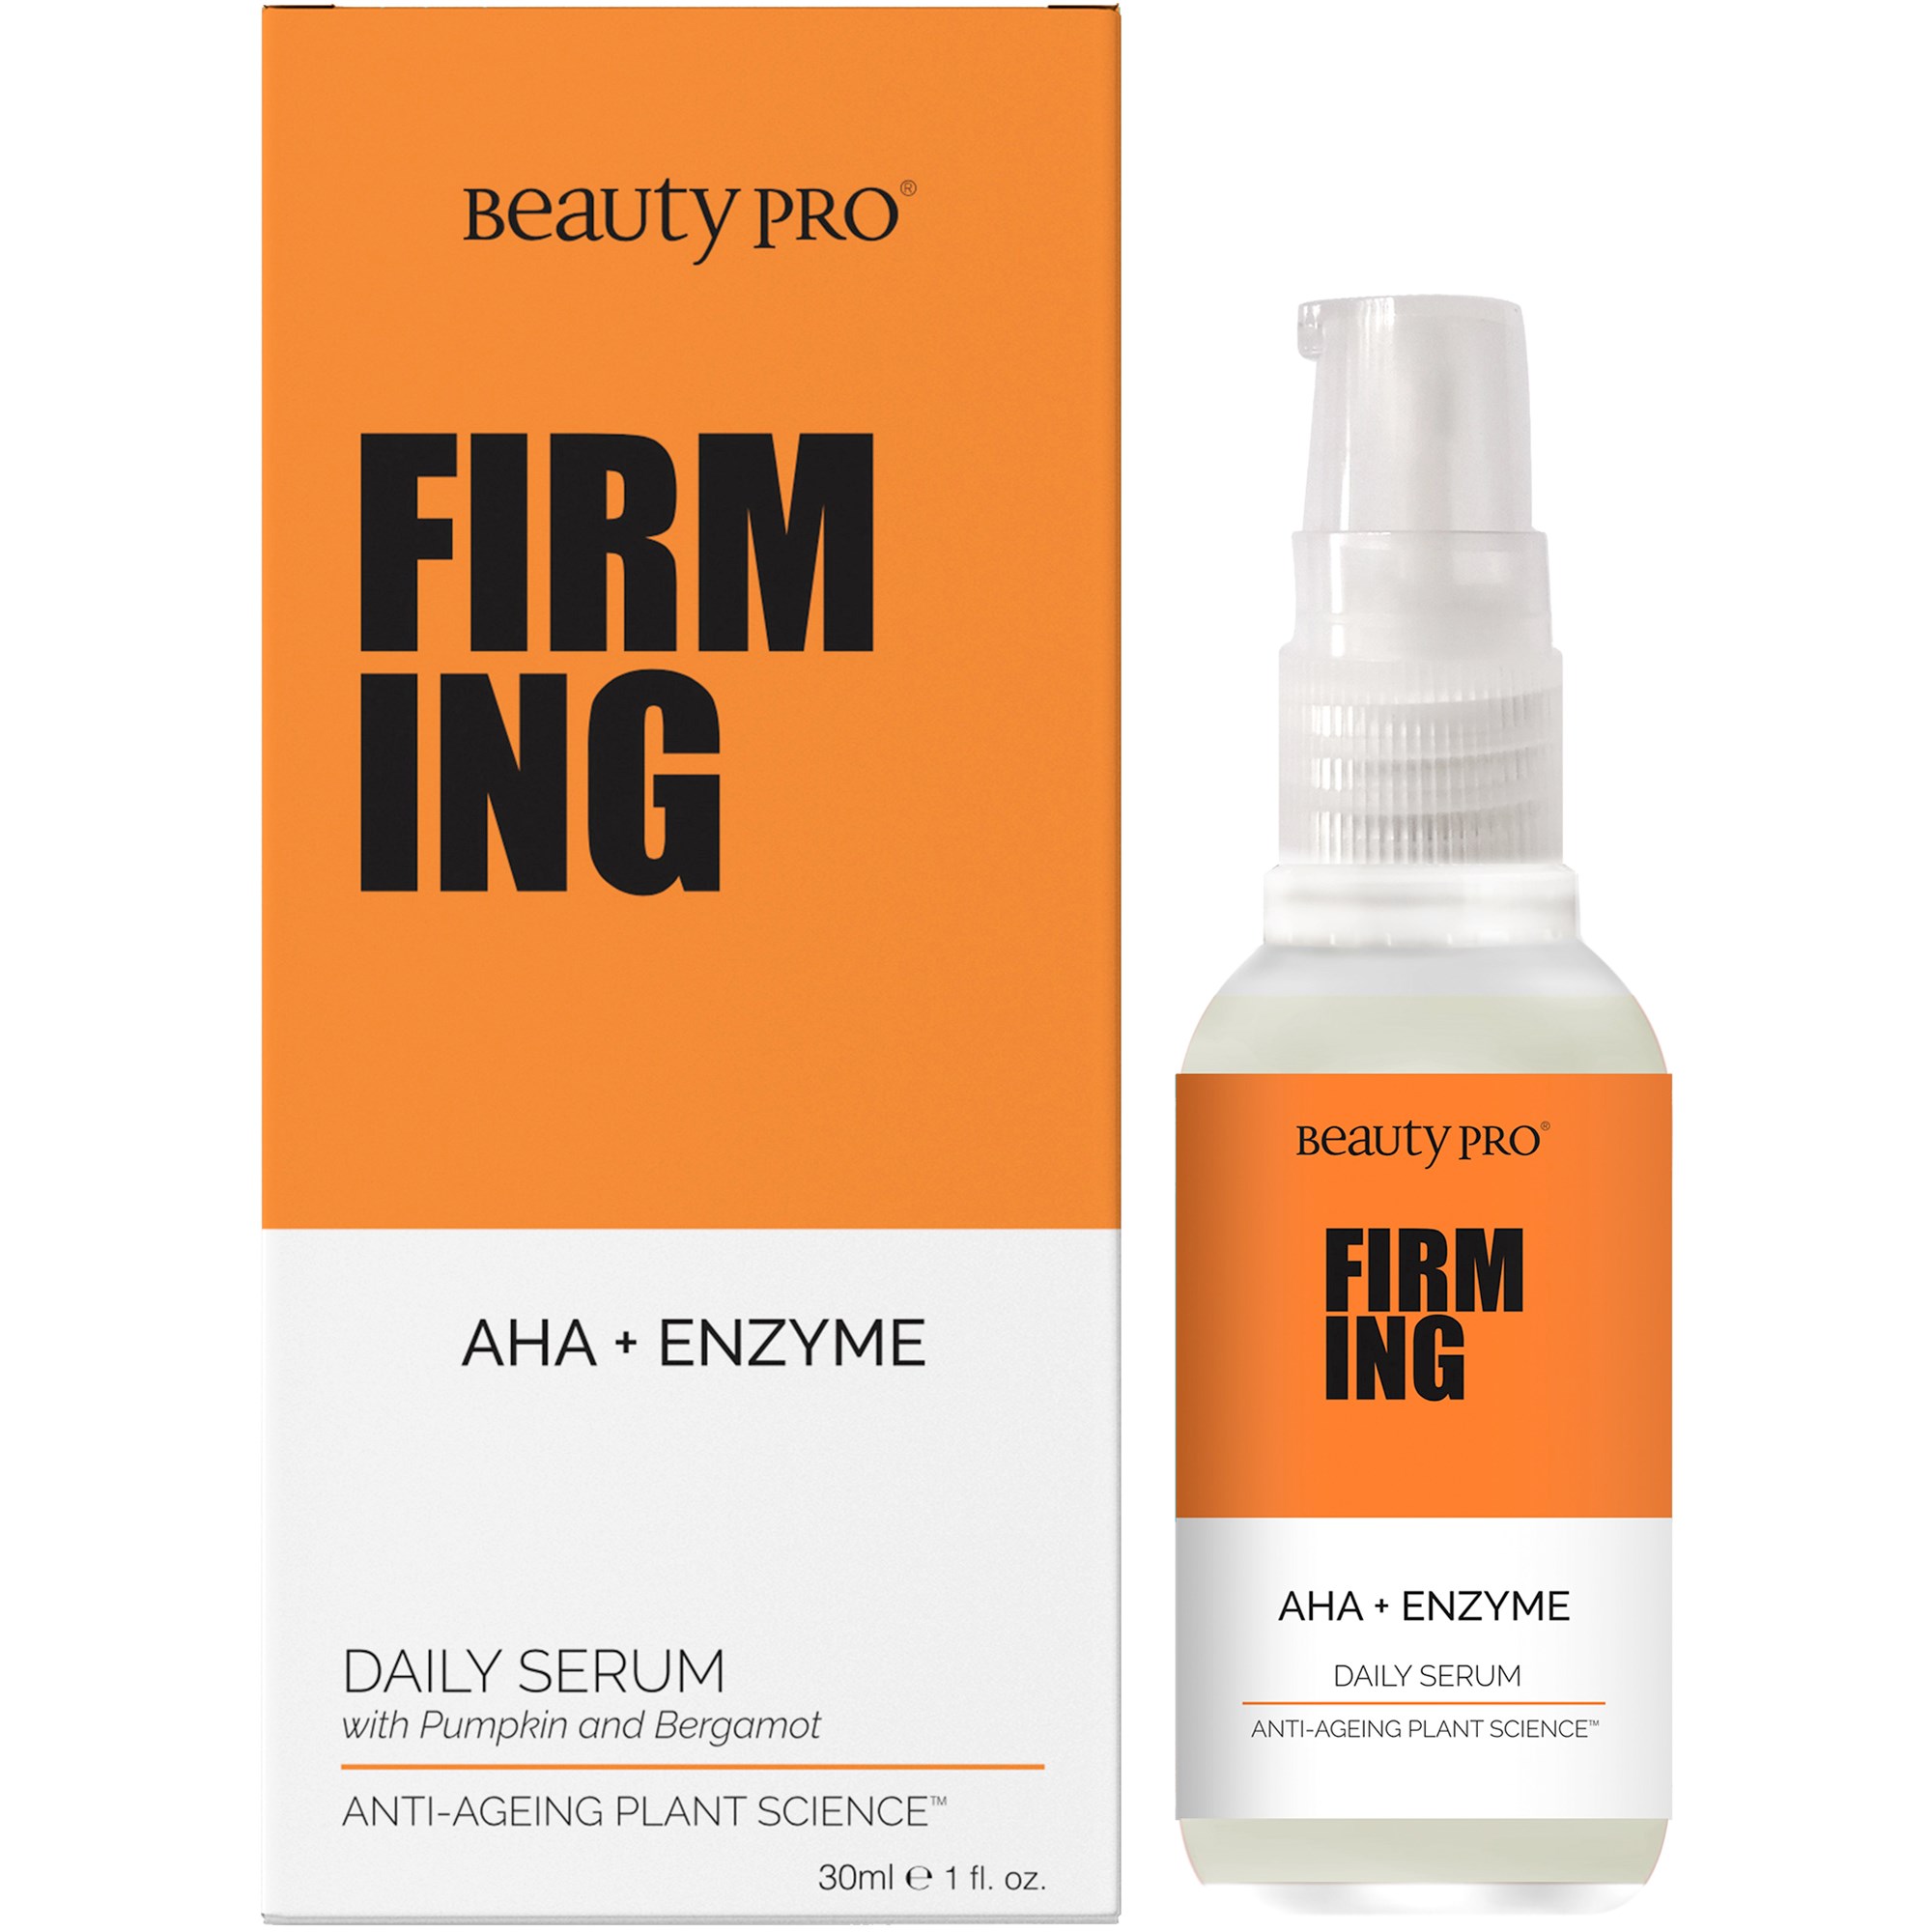 Beauty PRO Firming Daily Serum AHA+Enzymes 30 ml